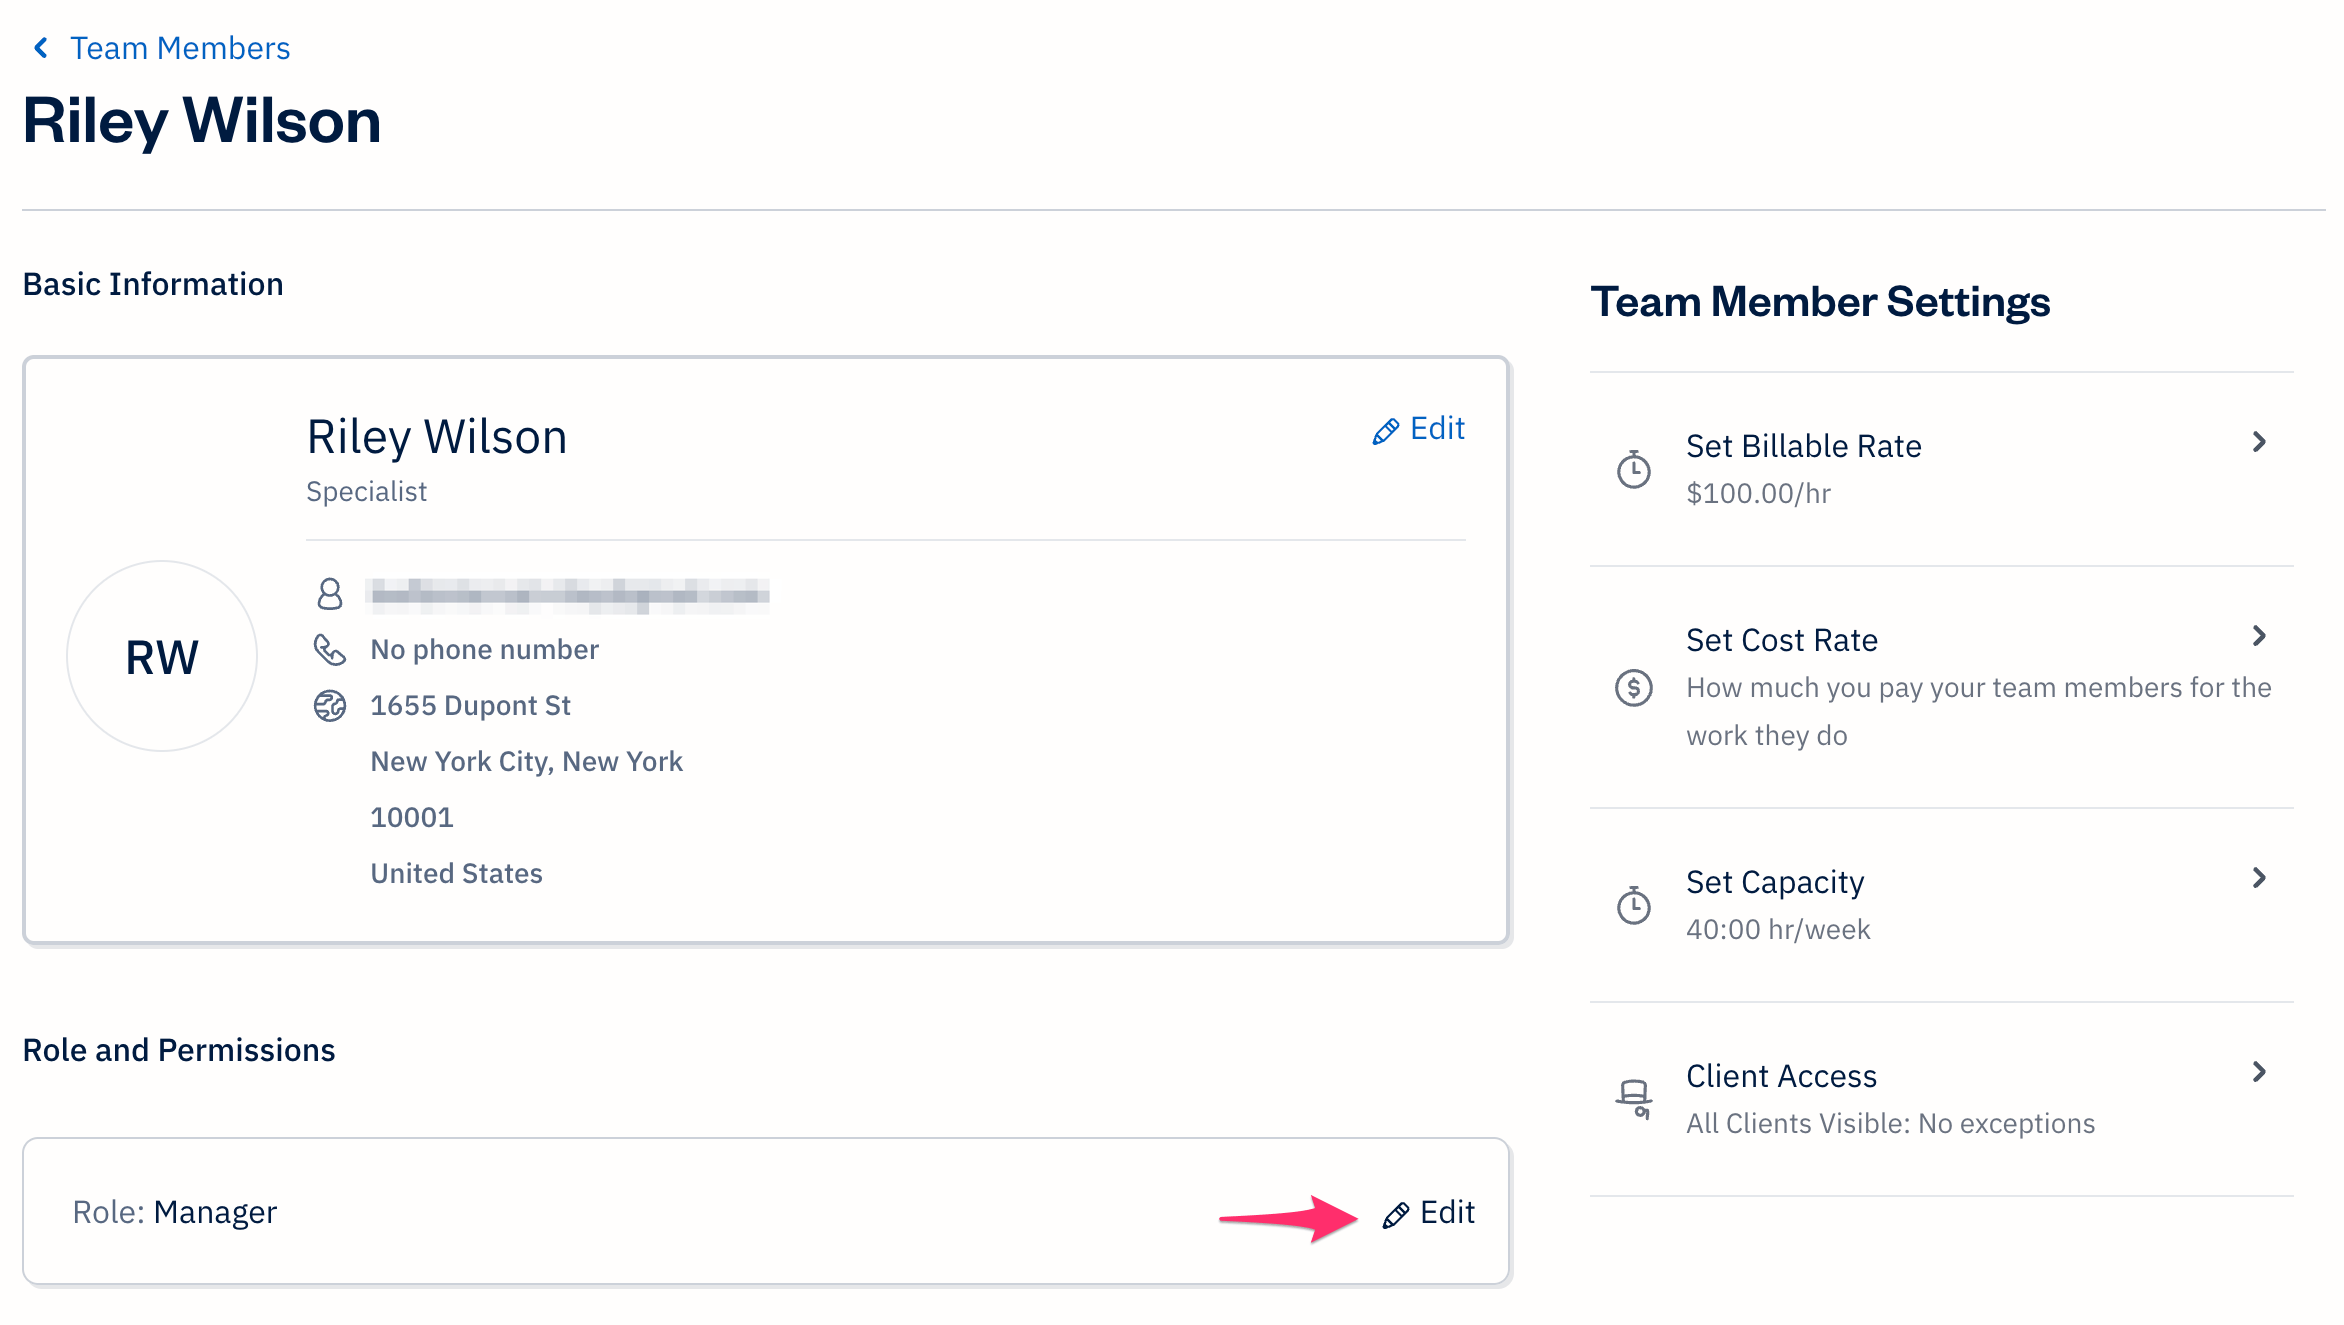 Team member profile with edit button selected under Roles and Permissions.